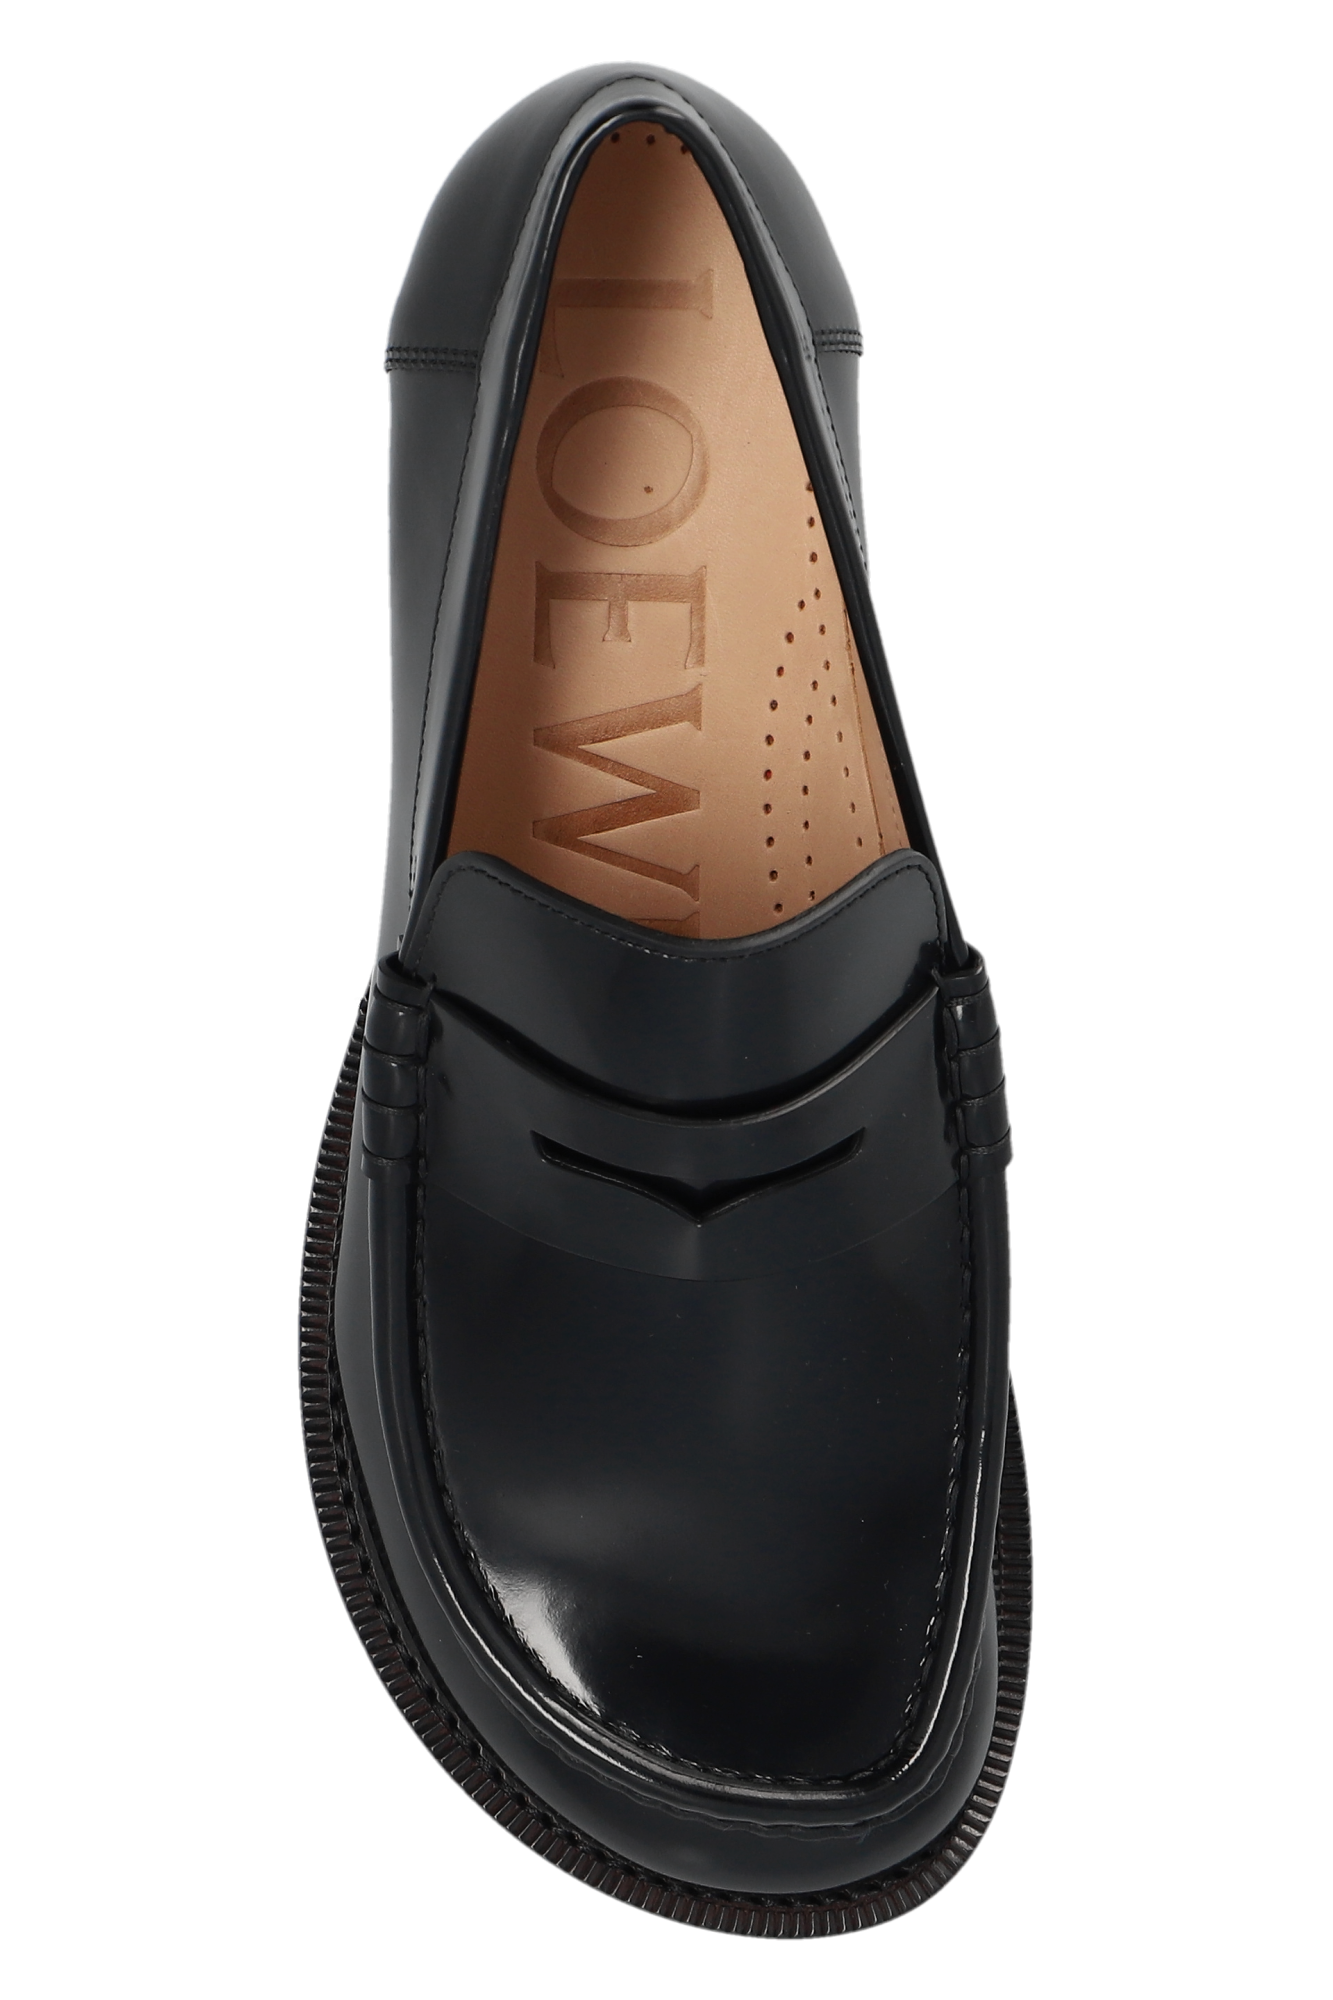 Loewe ‘Campo’ leather loafer pumps | Women's Shoes | Vitkac